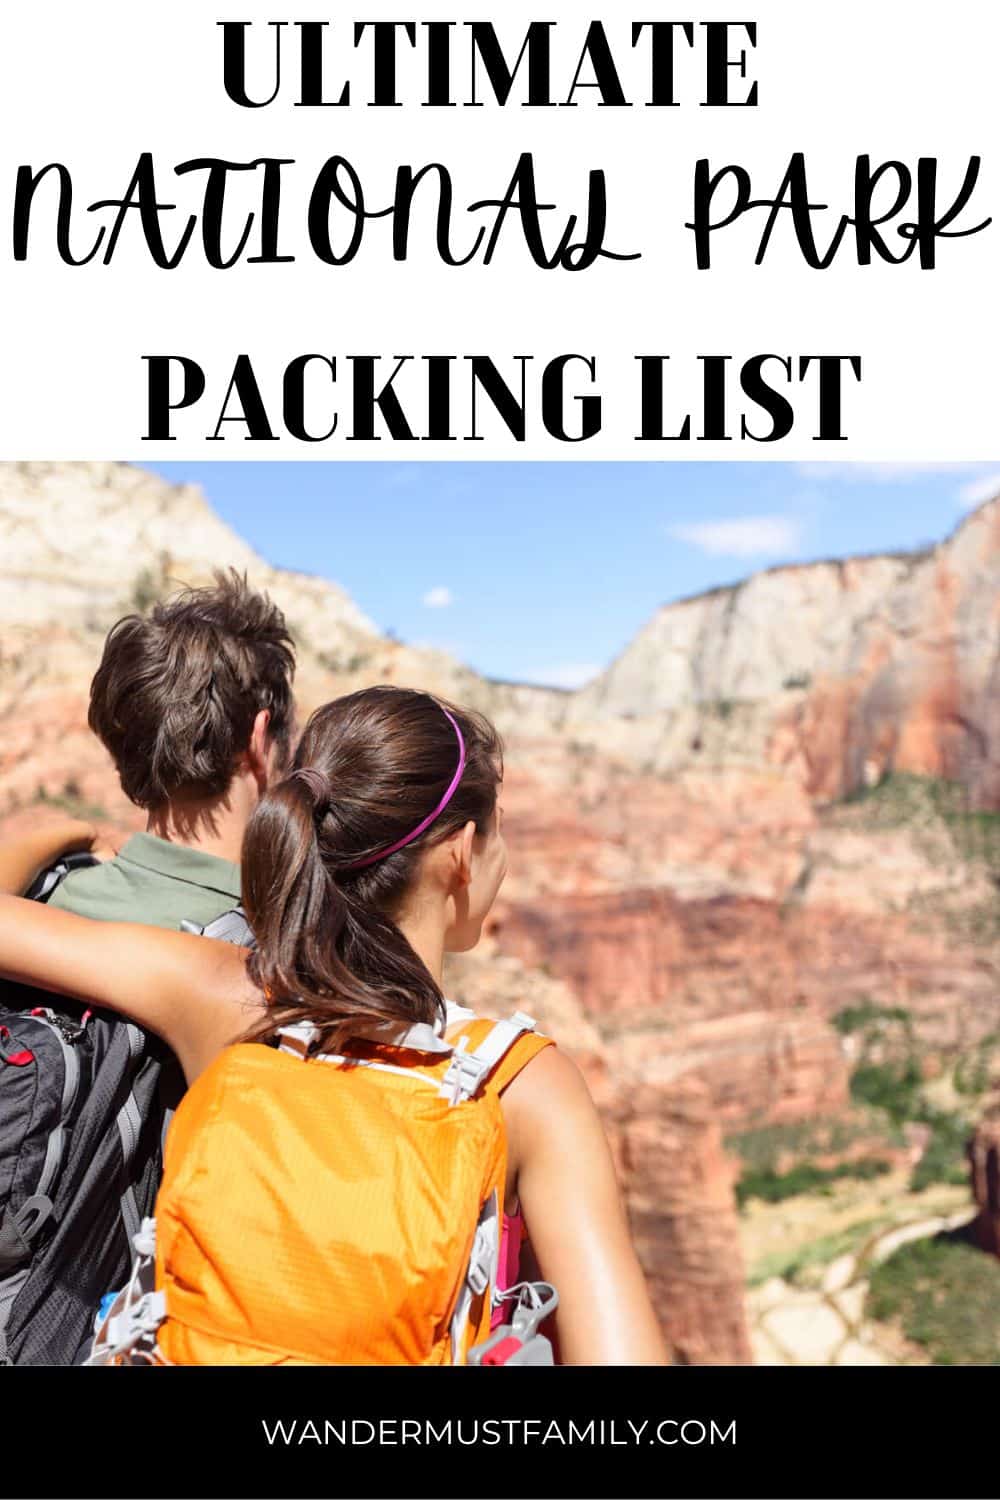 National Park Packing List Pin